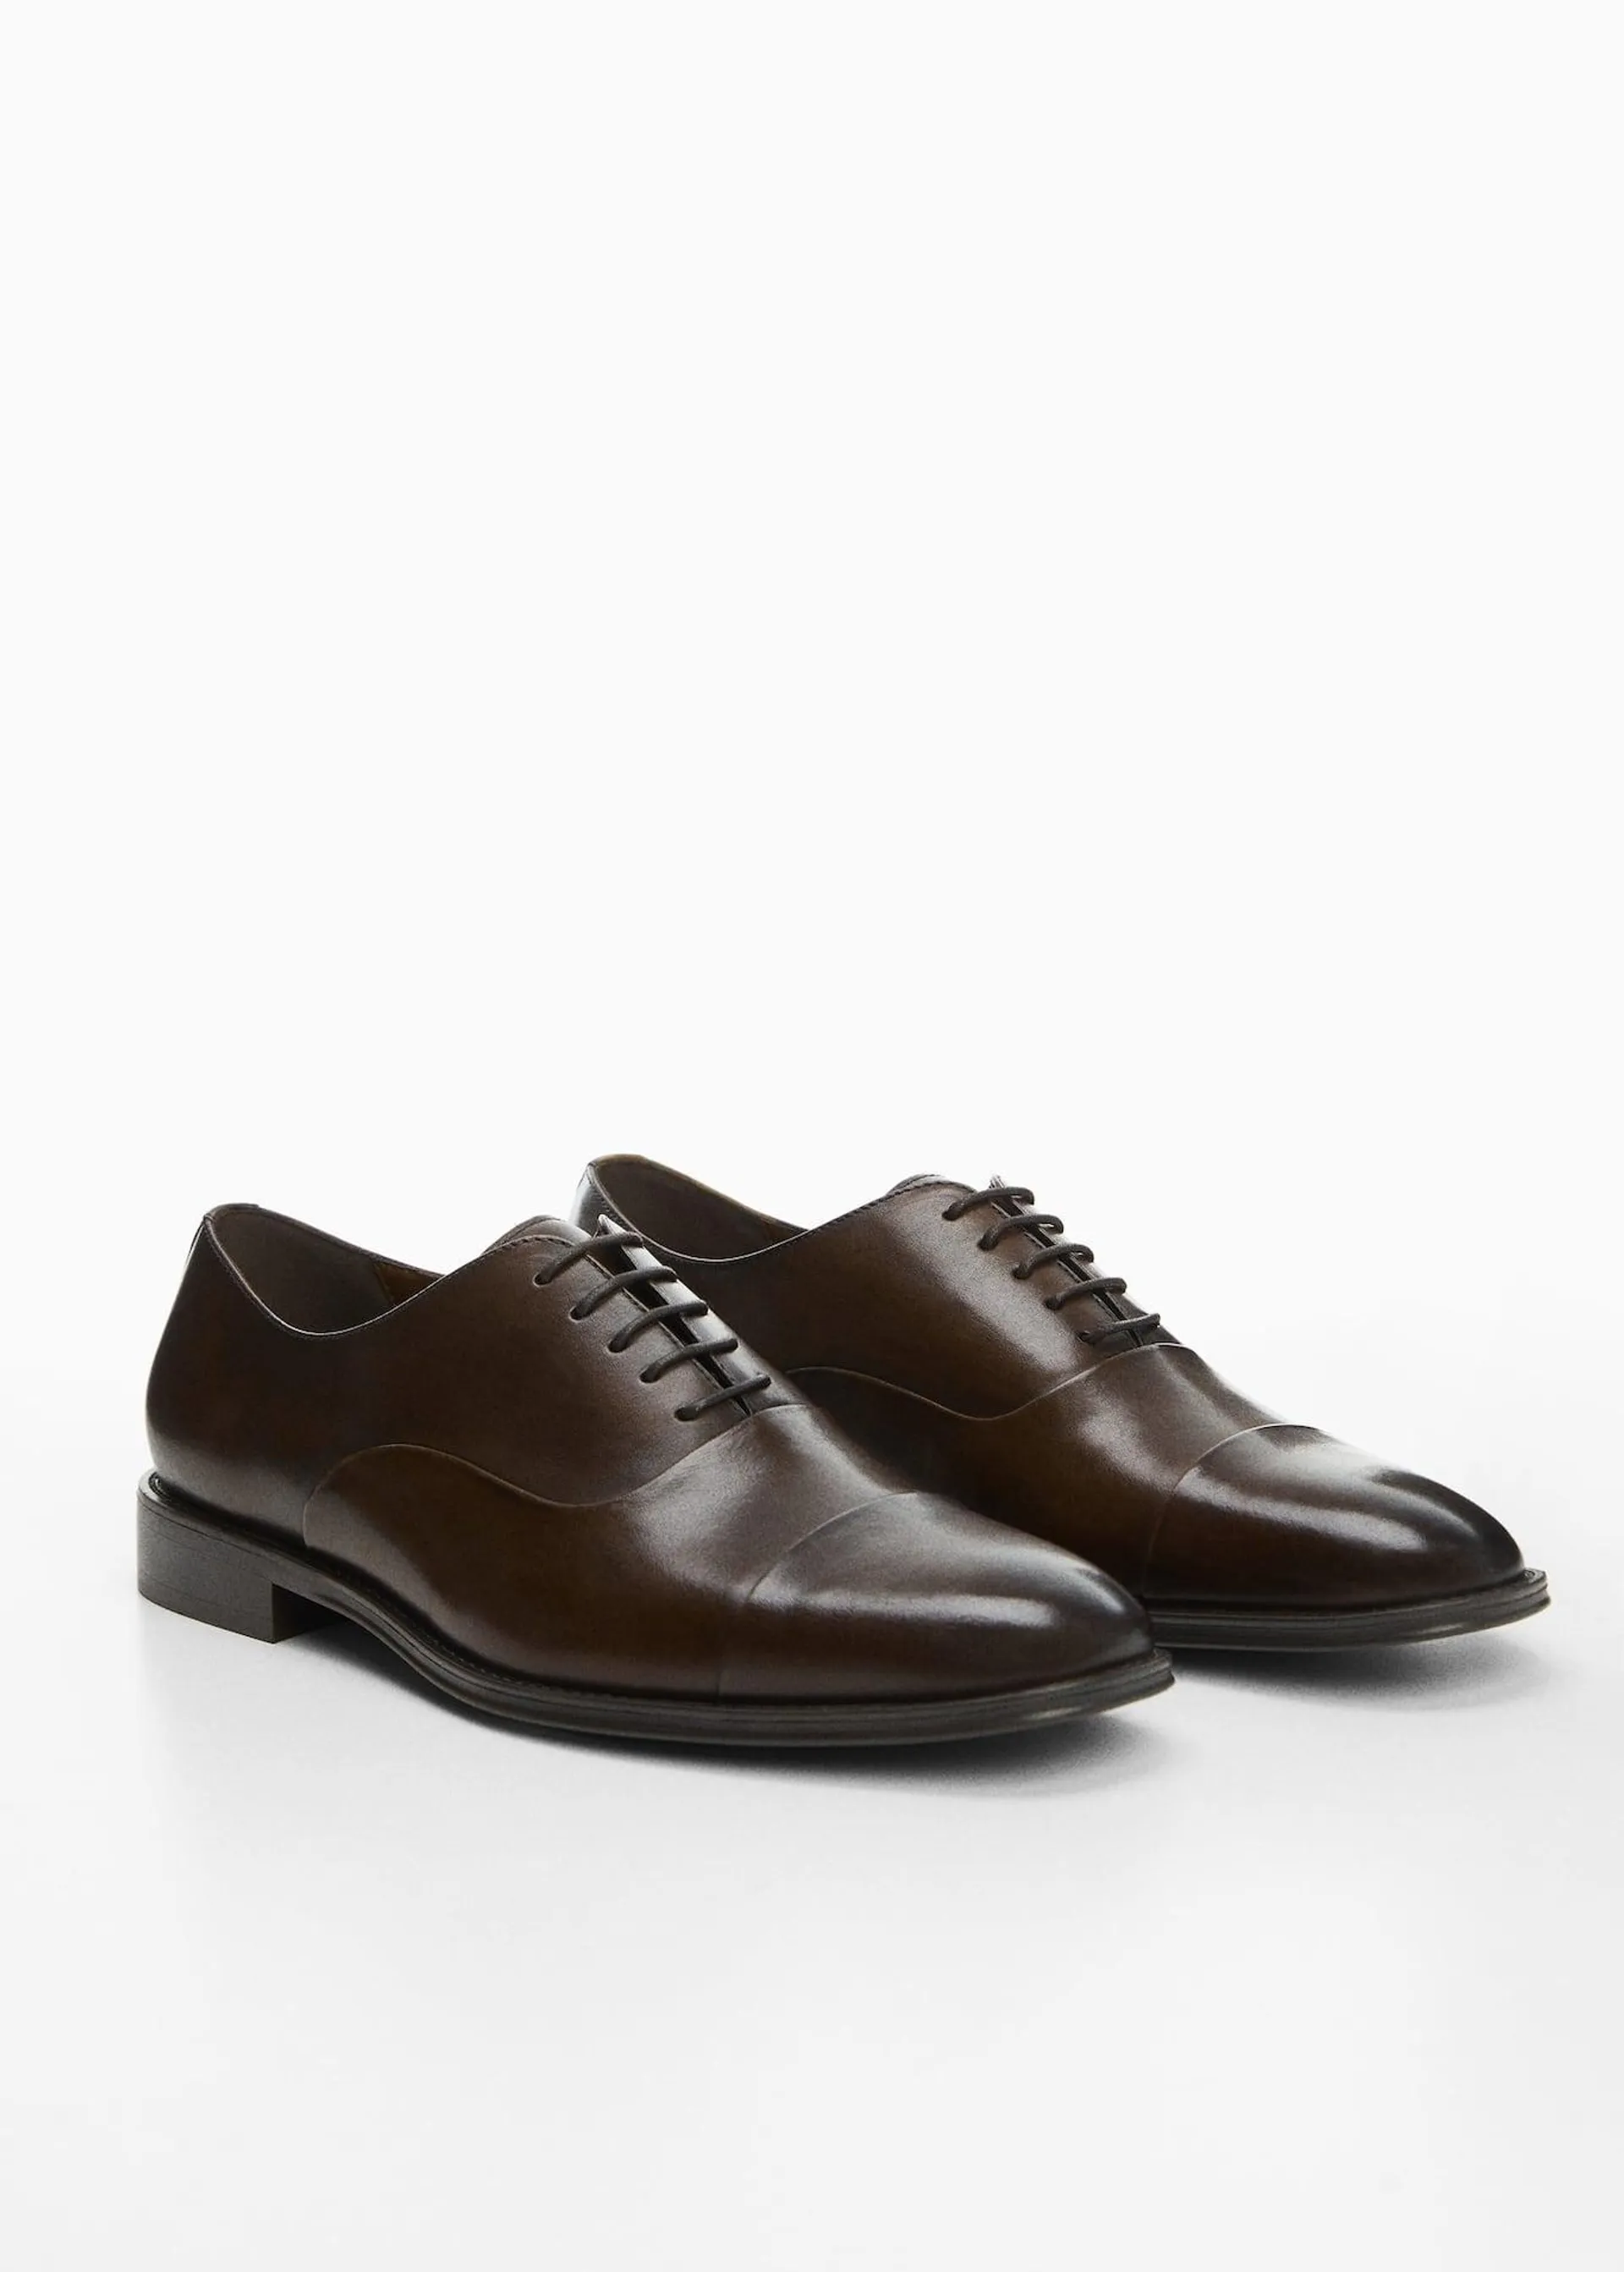 Elongated leather suit shoes